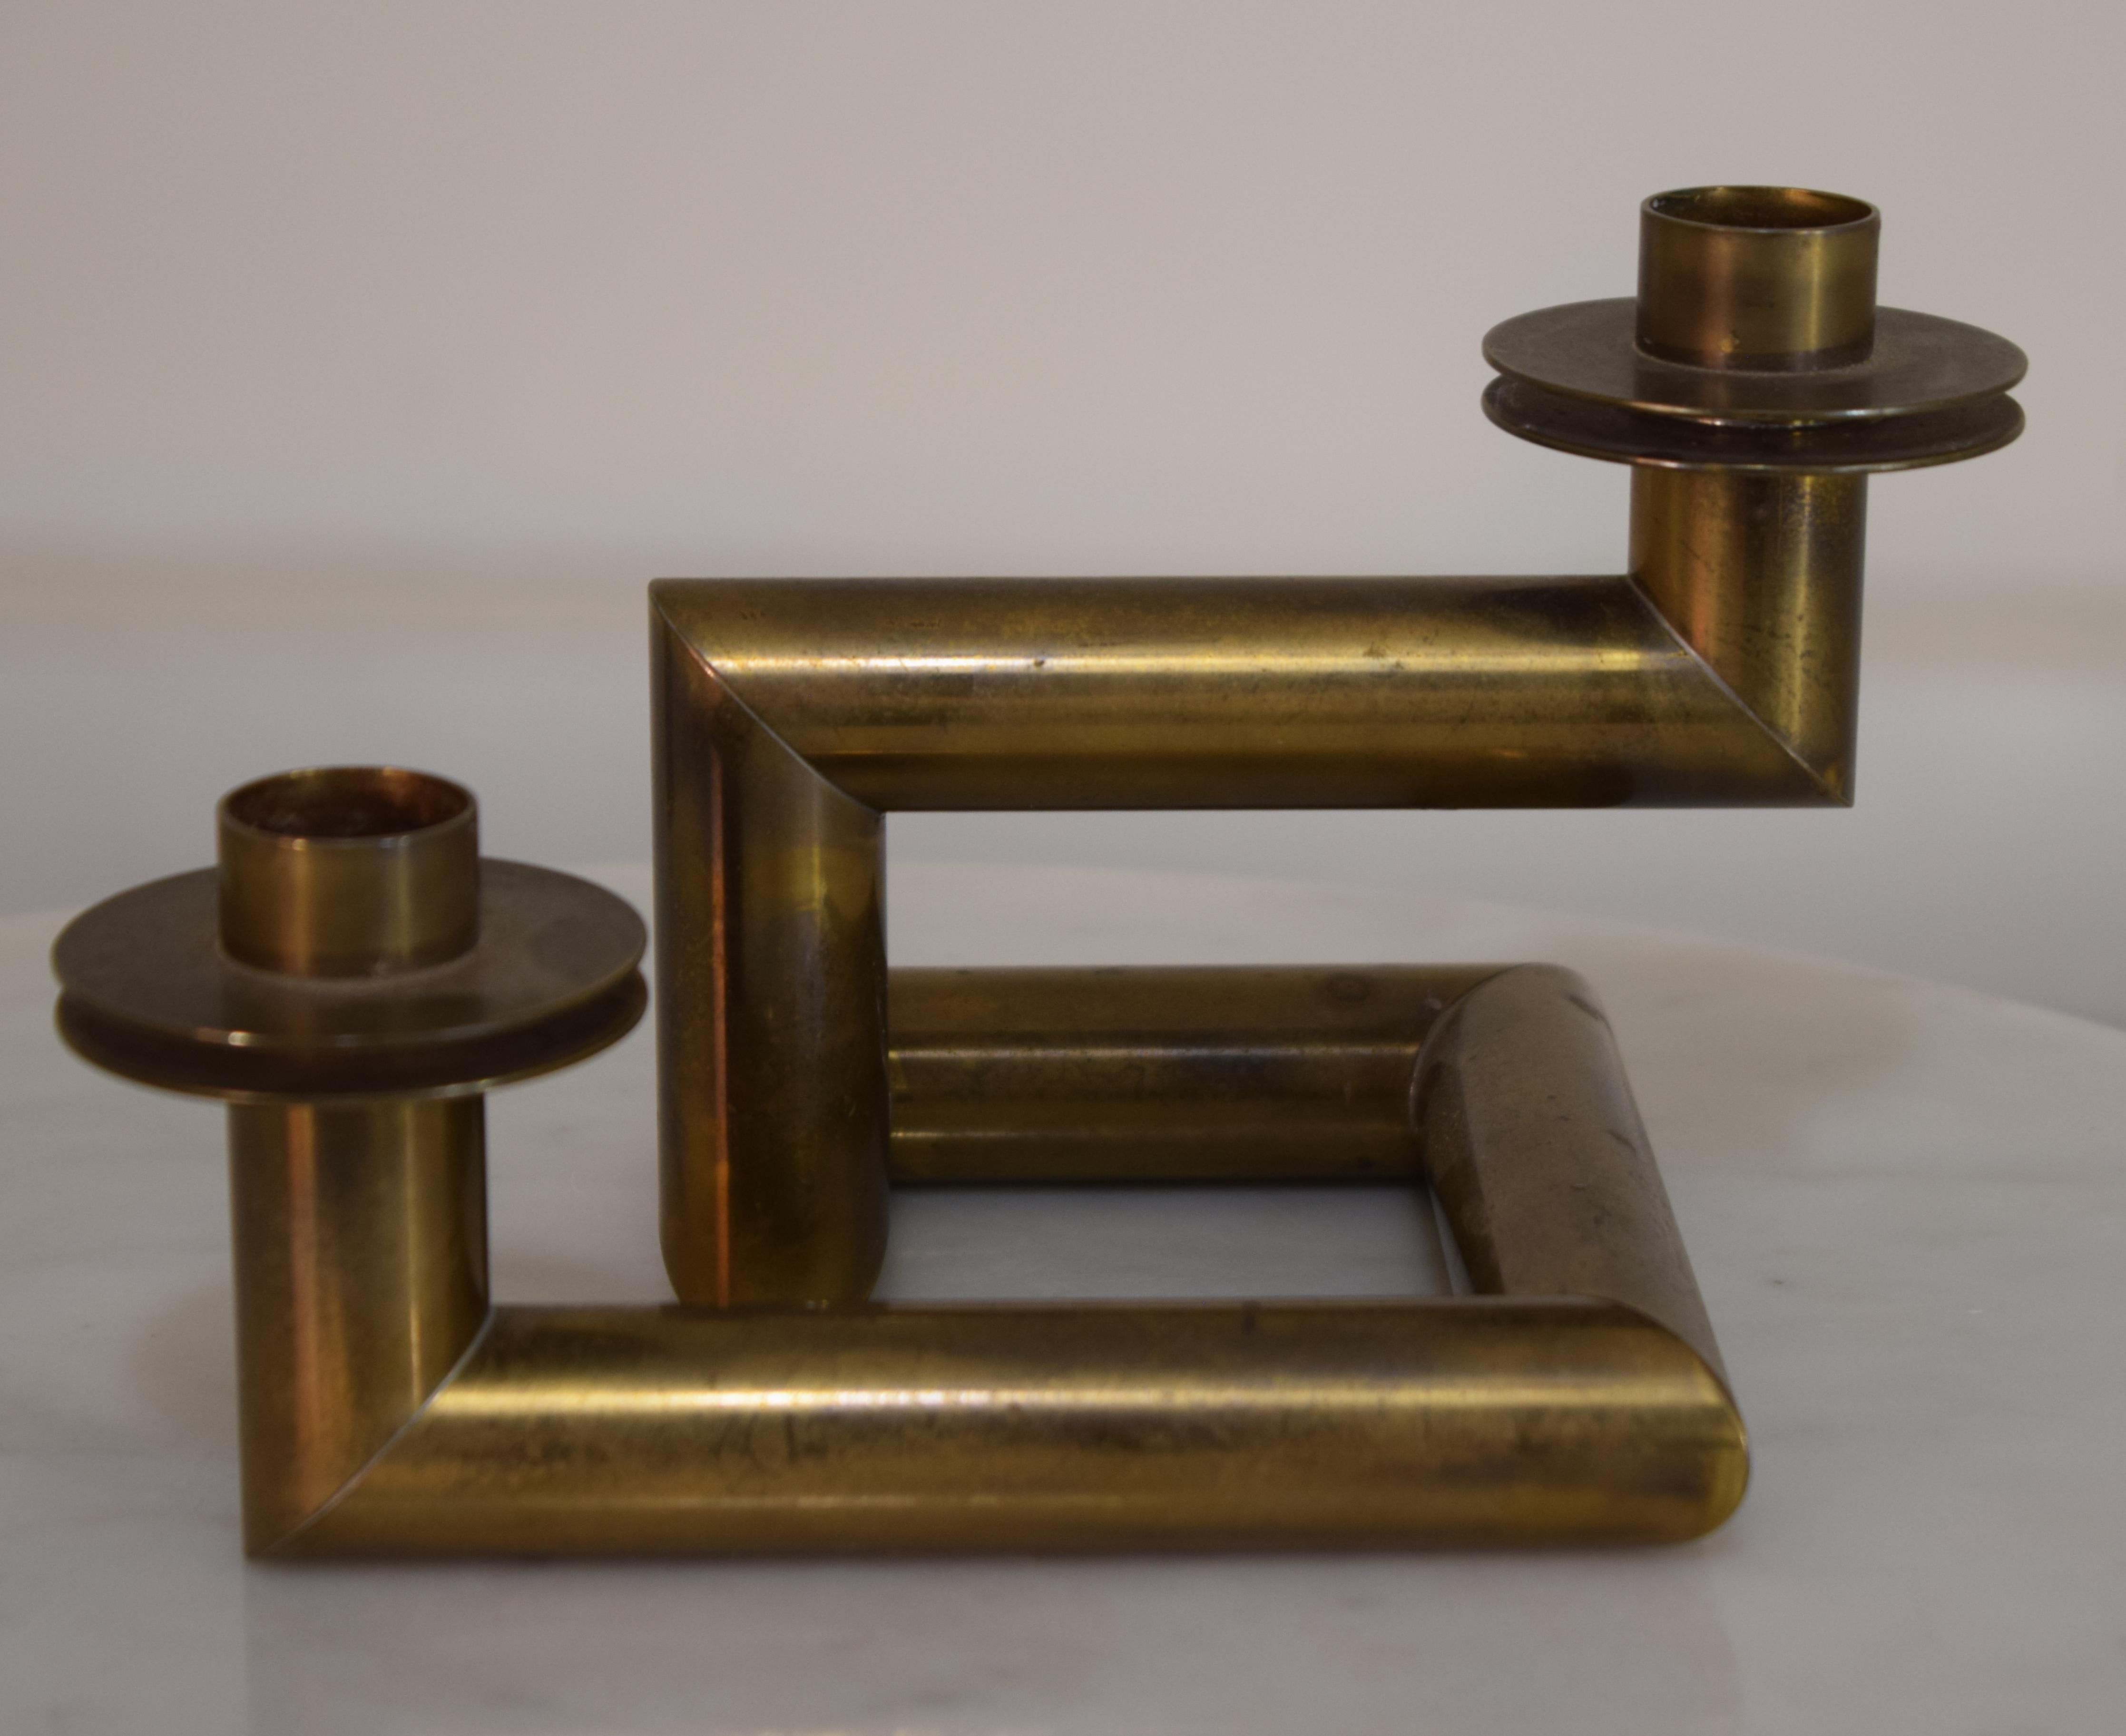 Production date unknown. Assumed 1950's. comprises of welded brass tube with 2 removable candle spouts for insertion of candles. No markings. Work would compliment a machine age or Frank Lloyd Wright style table setting. Measures 6.5